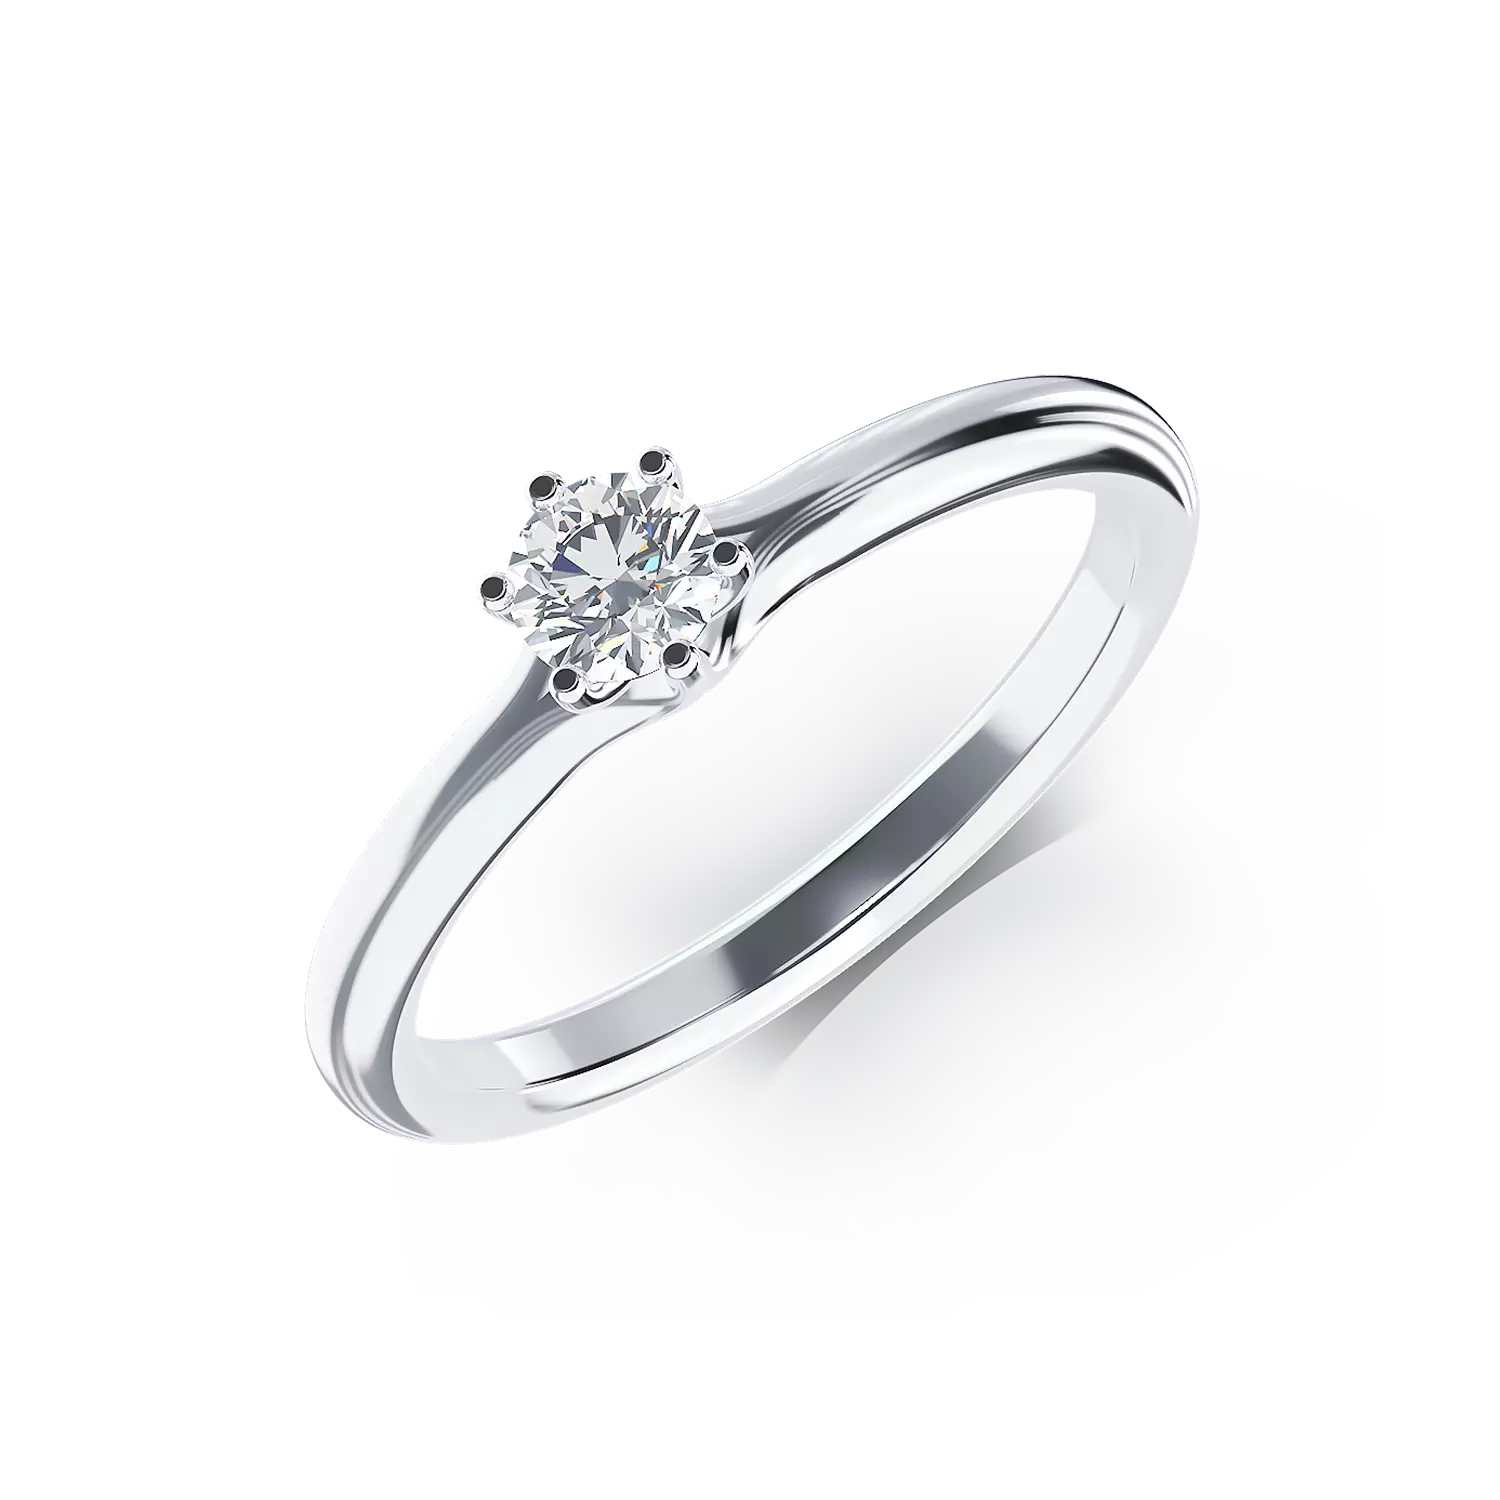 Platinum engagement ring with a 0.264ct solitaire diamond